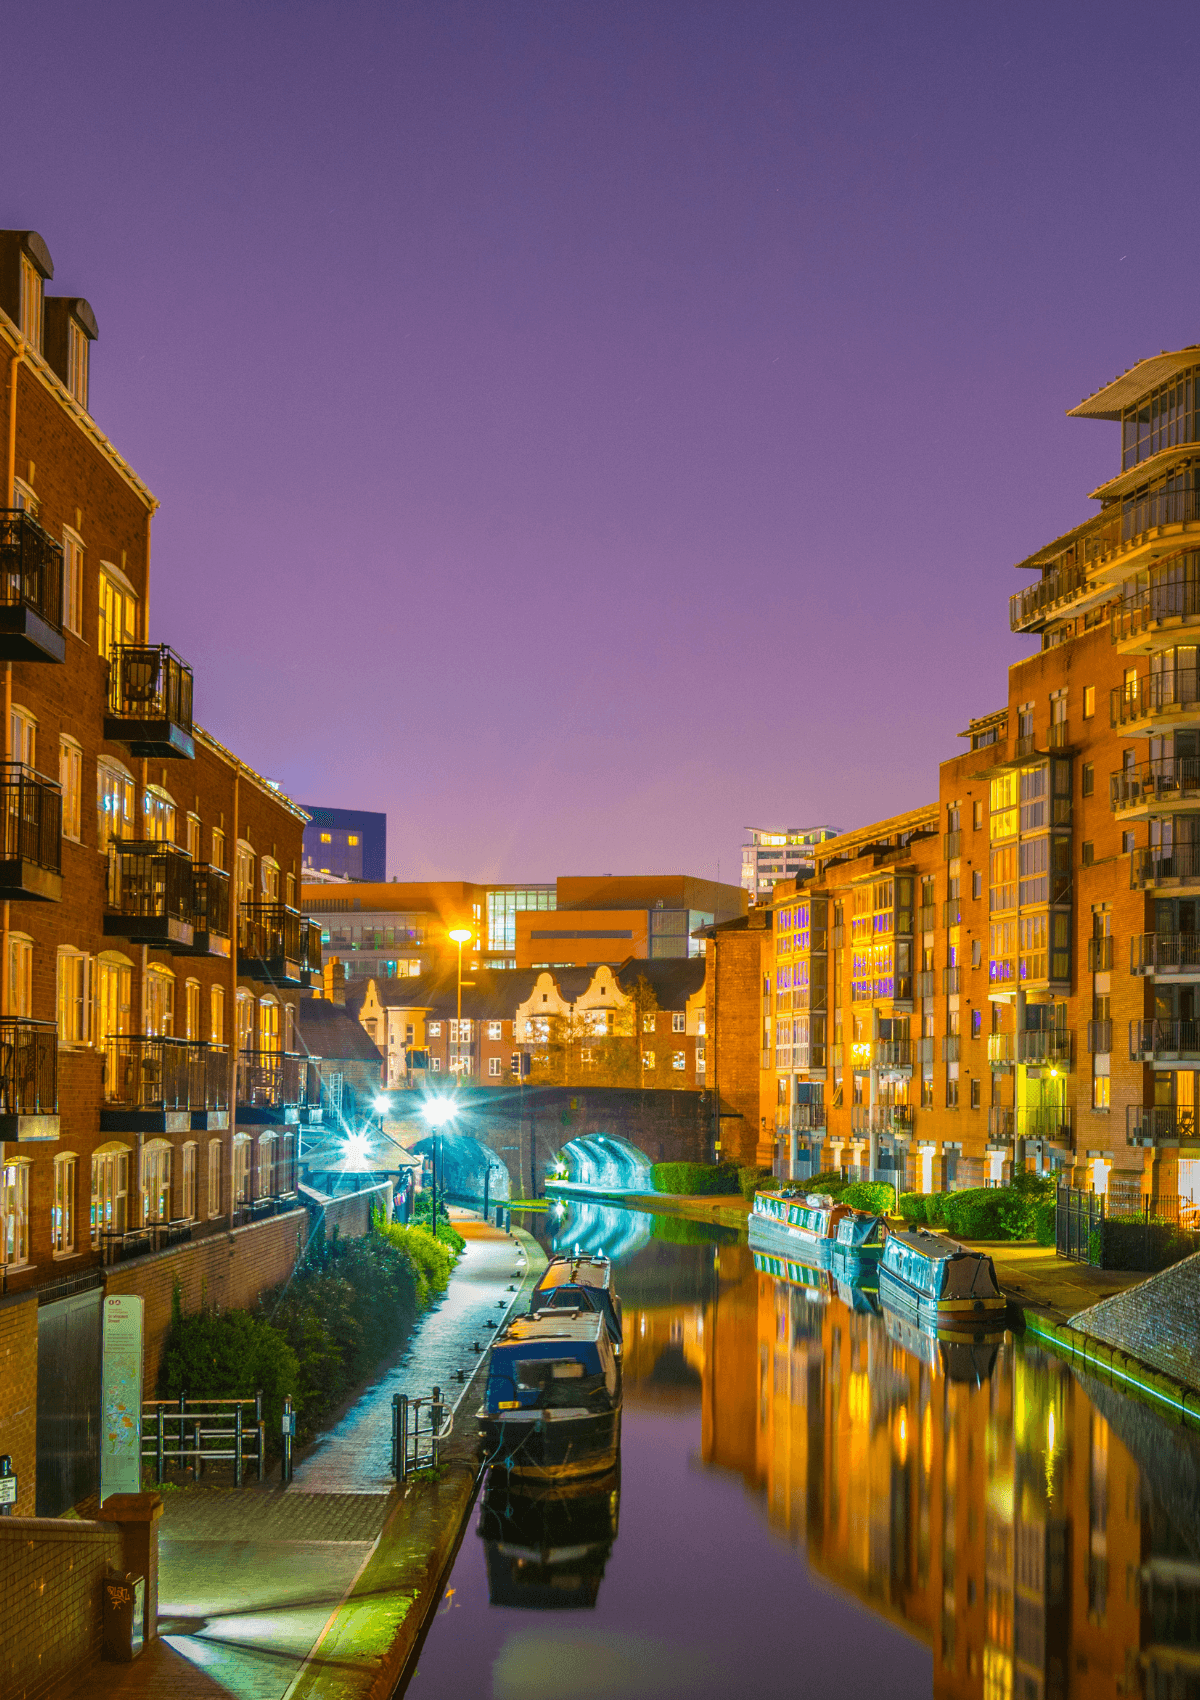 Birmingham at night by the water